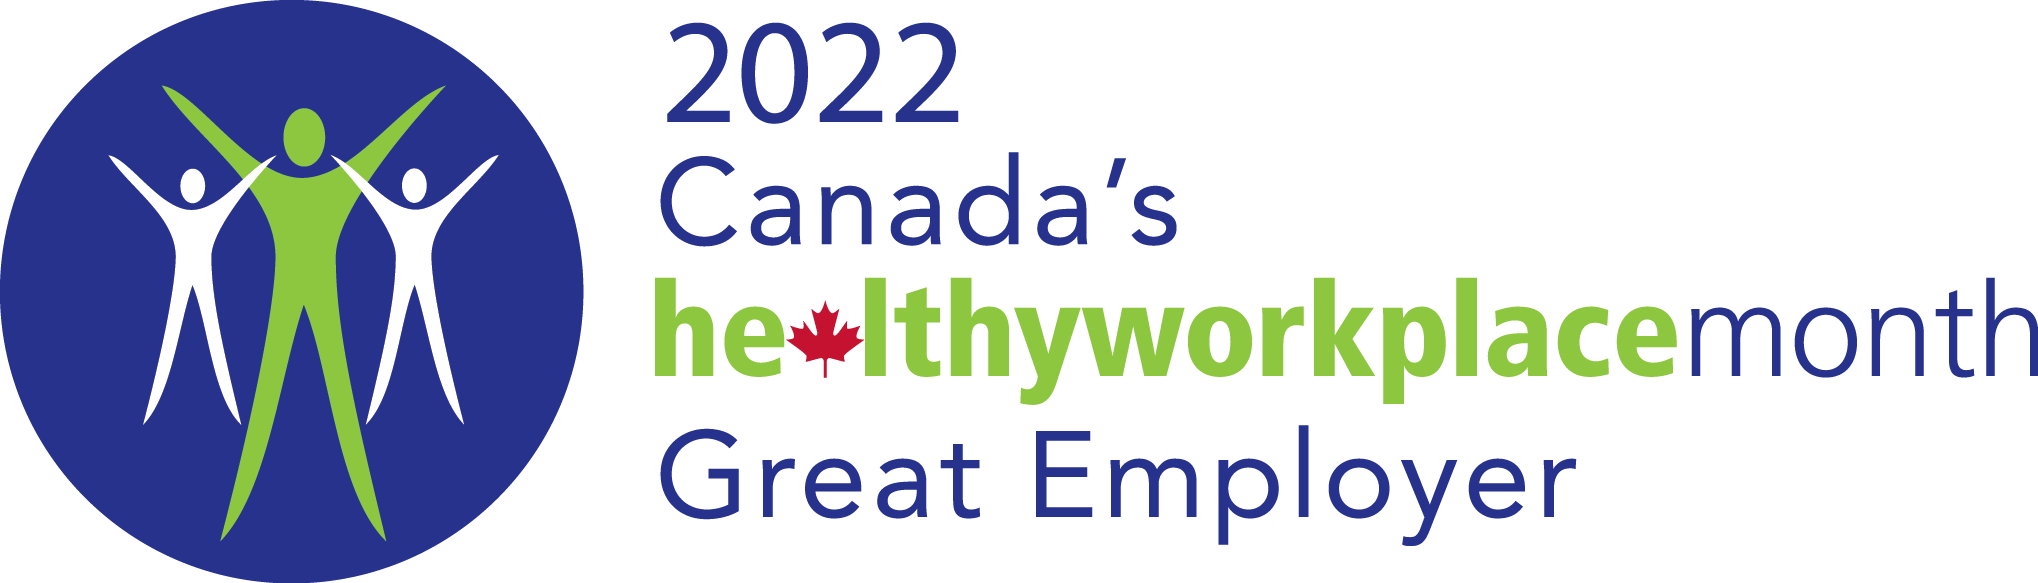 2022 Canada's healthy workplace month Great Employer award